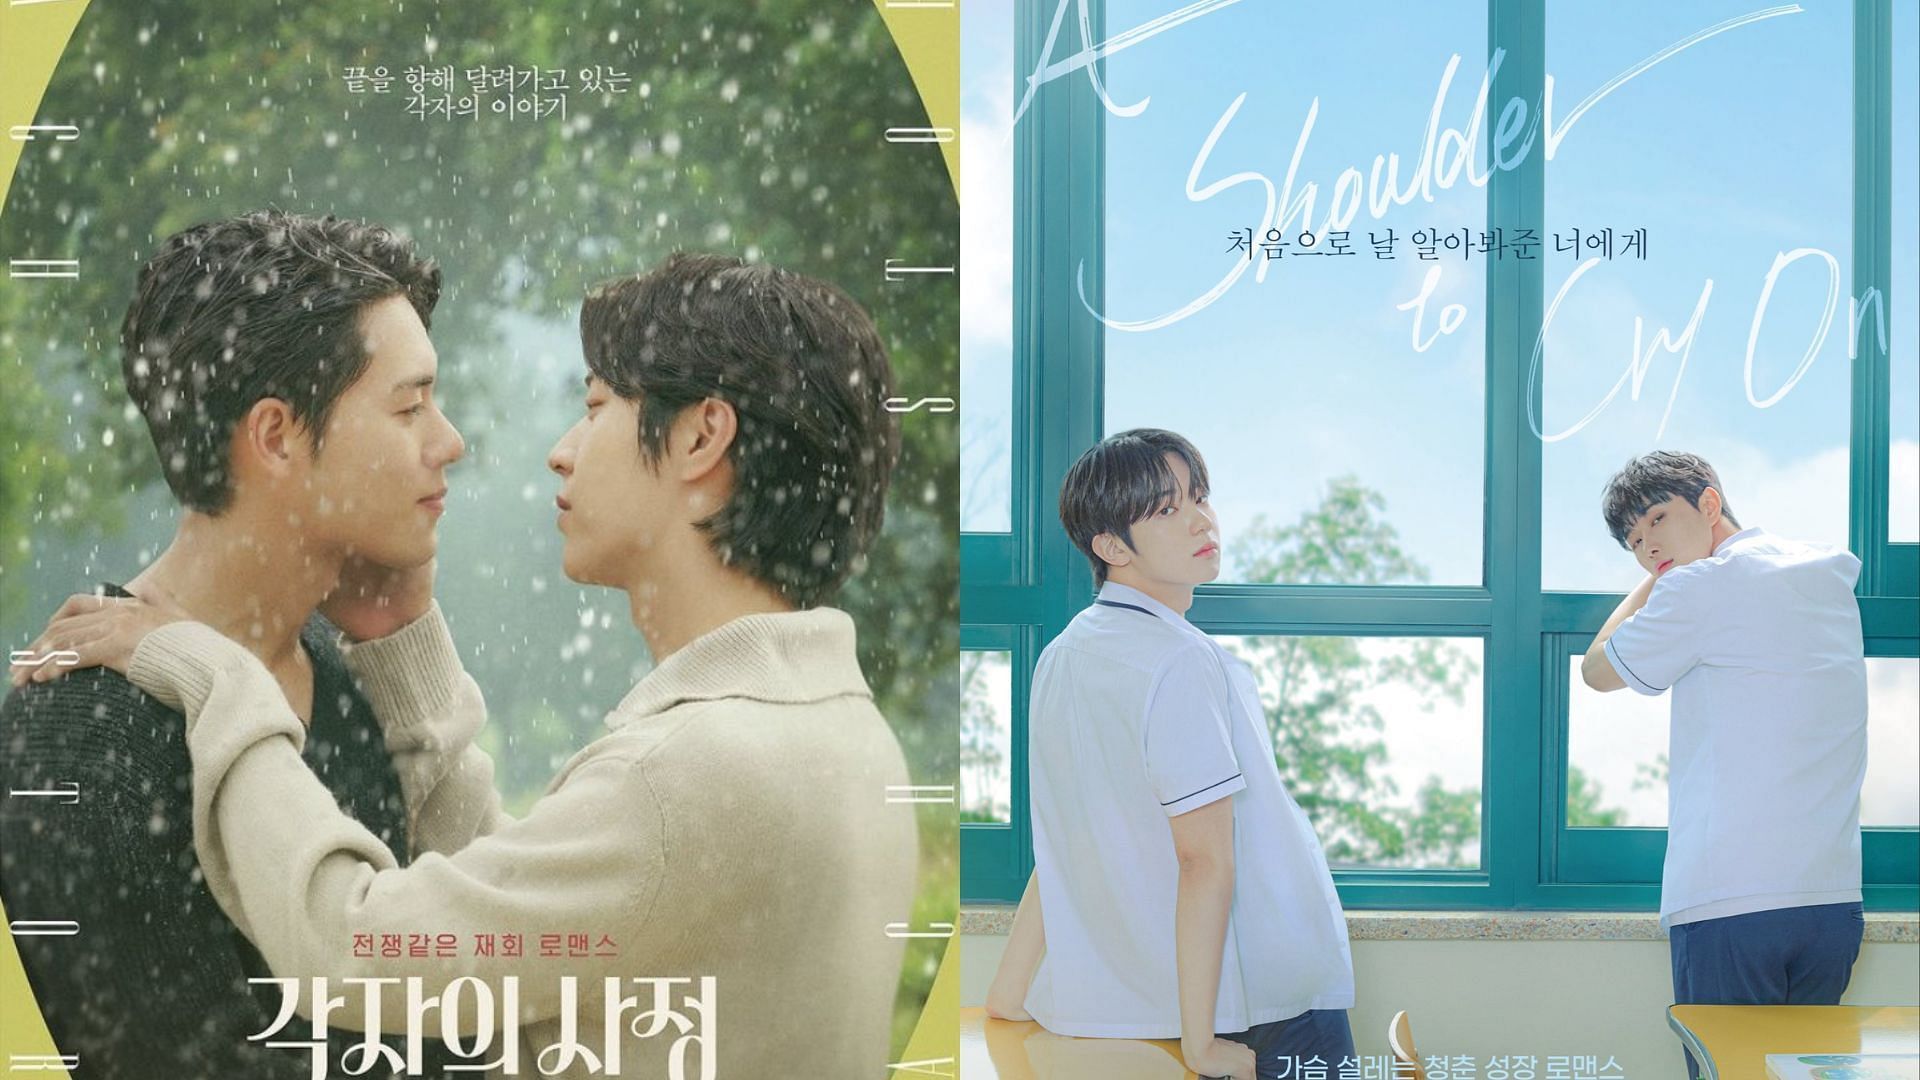 Official posters for Individual Circumstances and A Shoulder to Cry On (Images via Viki)